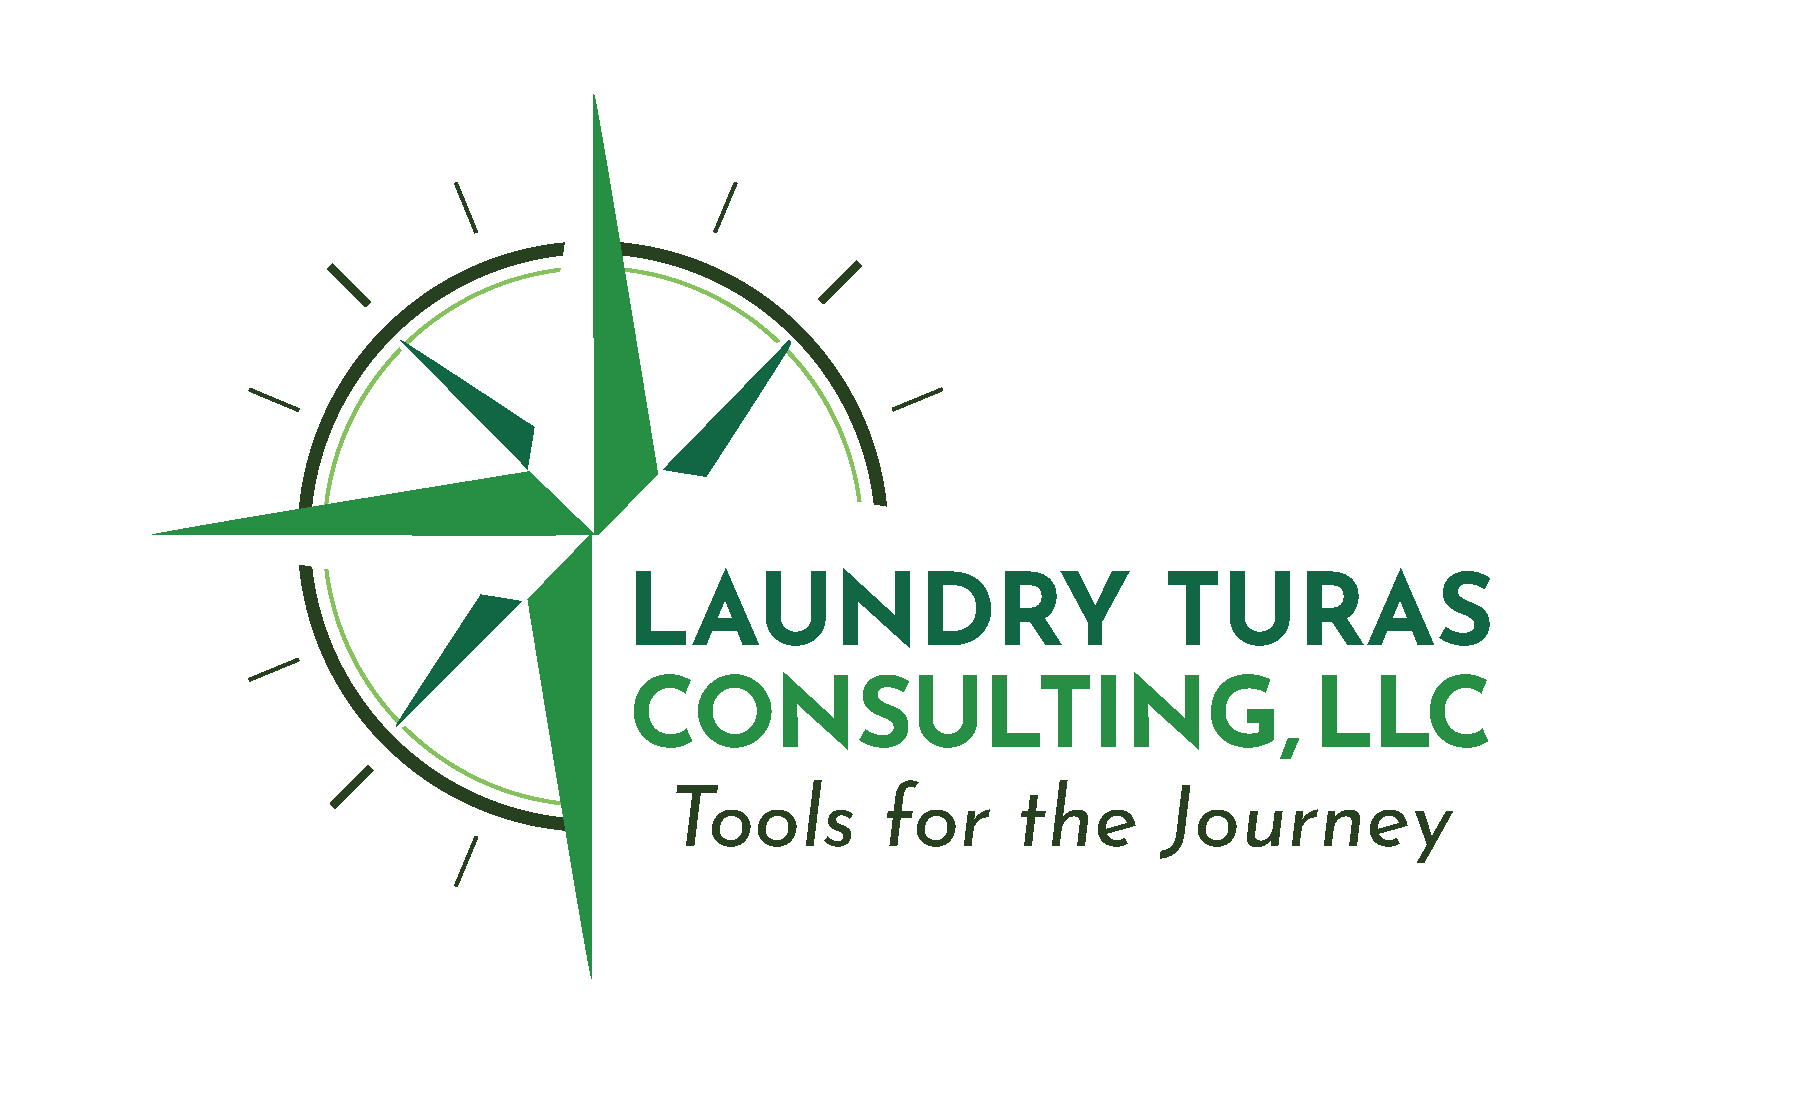 Laundry Turas Consulting, LLC | Tools for the Journey